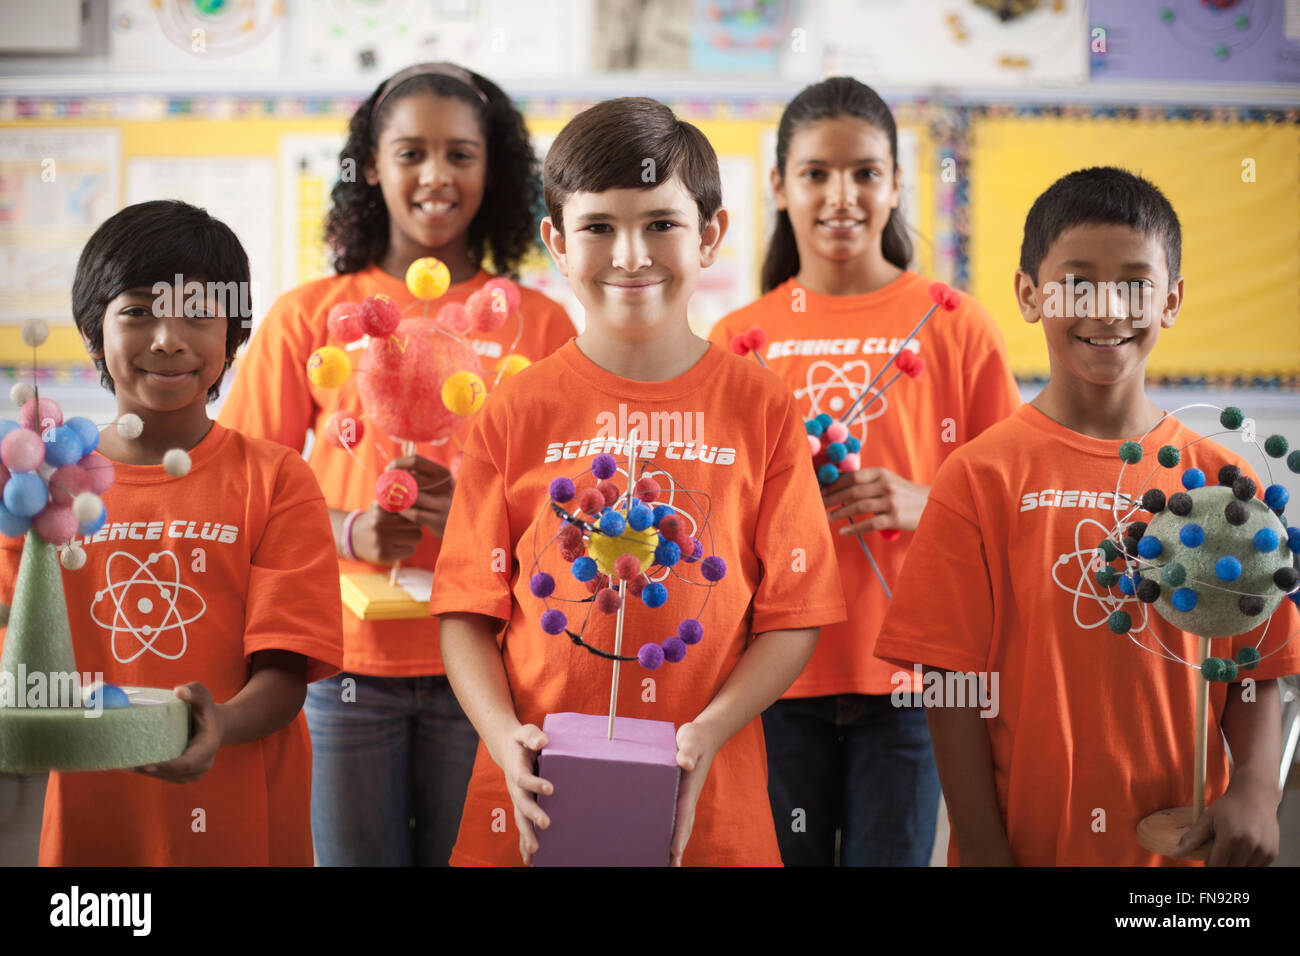 A group of girls and boys wearing the teeshirt of the Science Club, making molecular structure models. Stock Photo